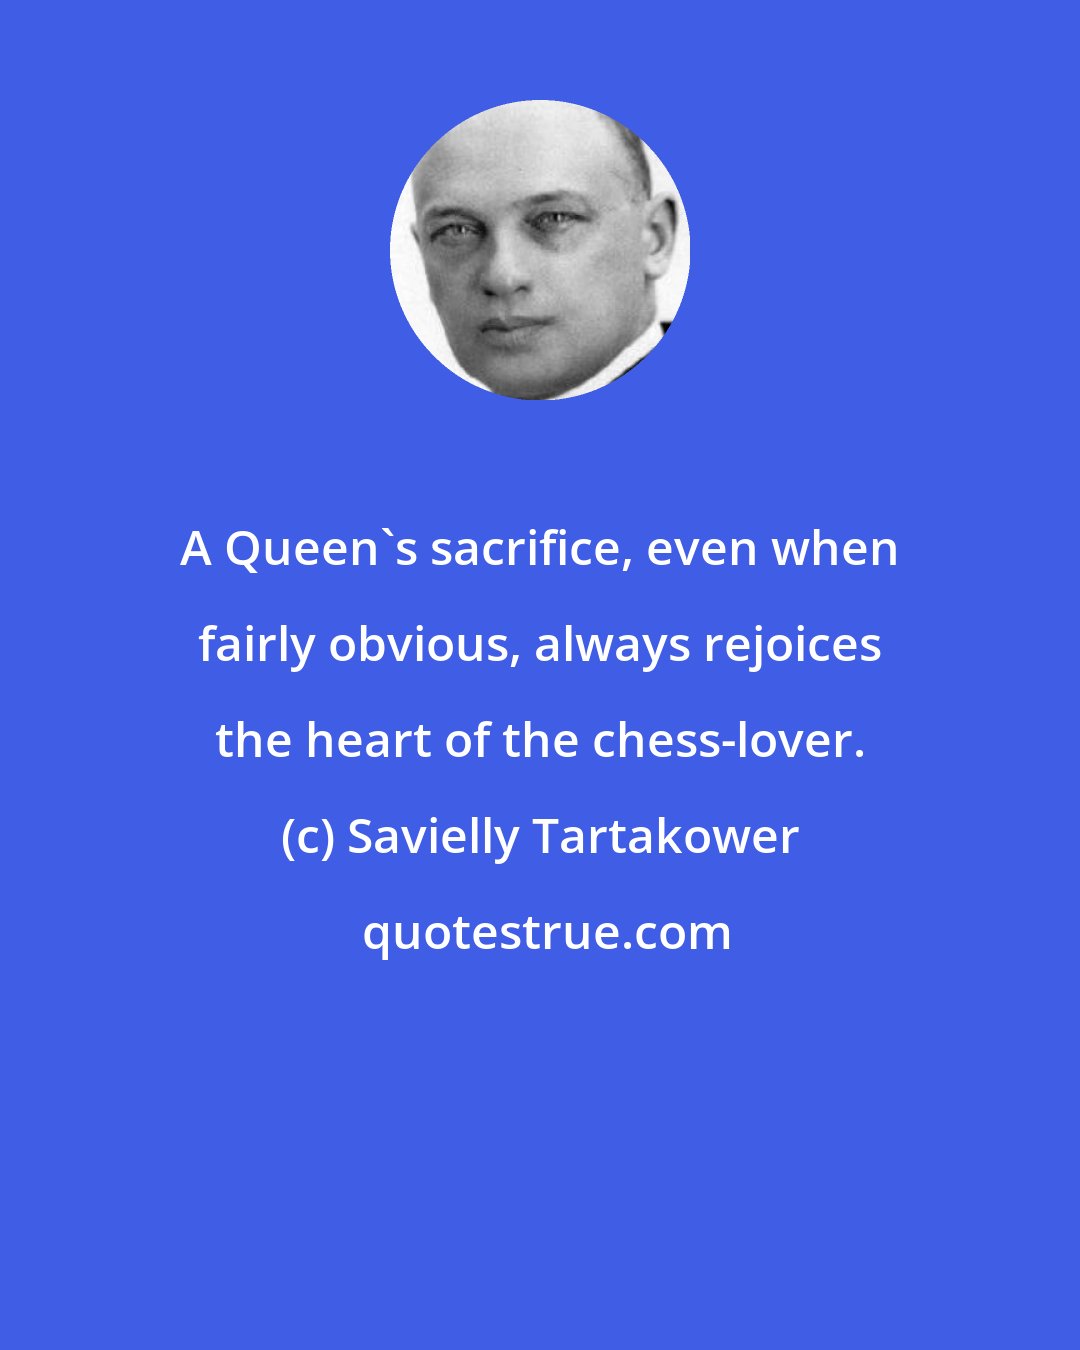 Savielly Tartakower: A Queen's sacrifice, even when fairly obvious, always rejoices the heart of the chess-lover.